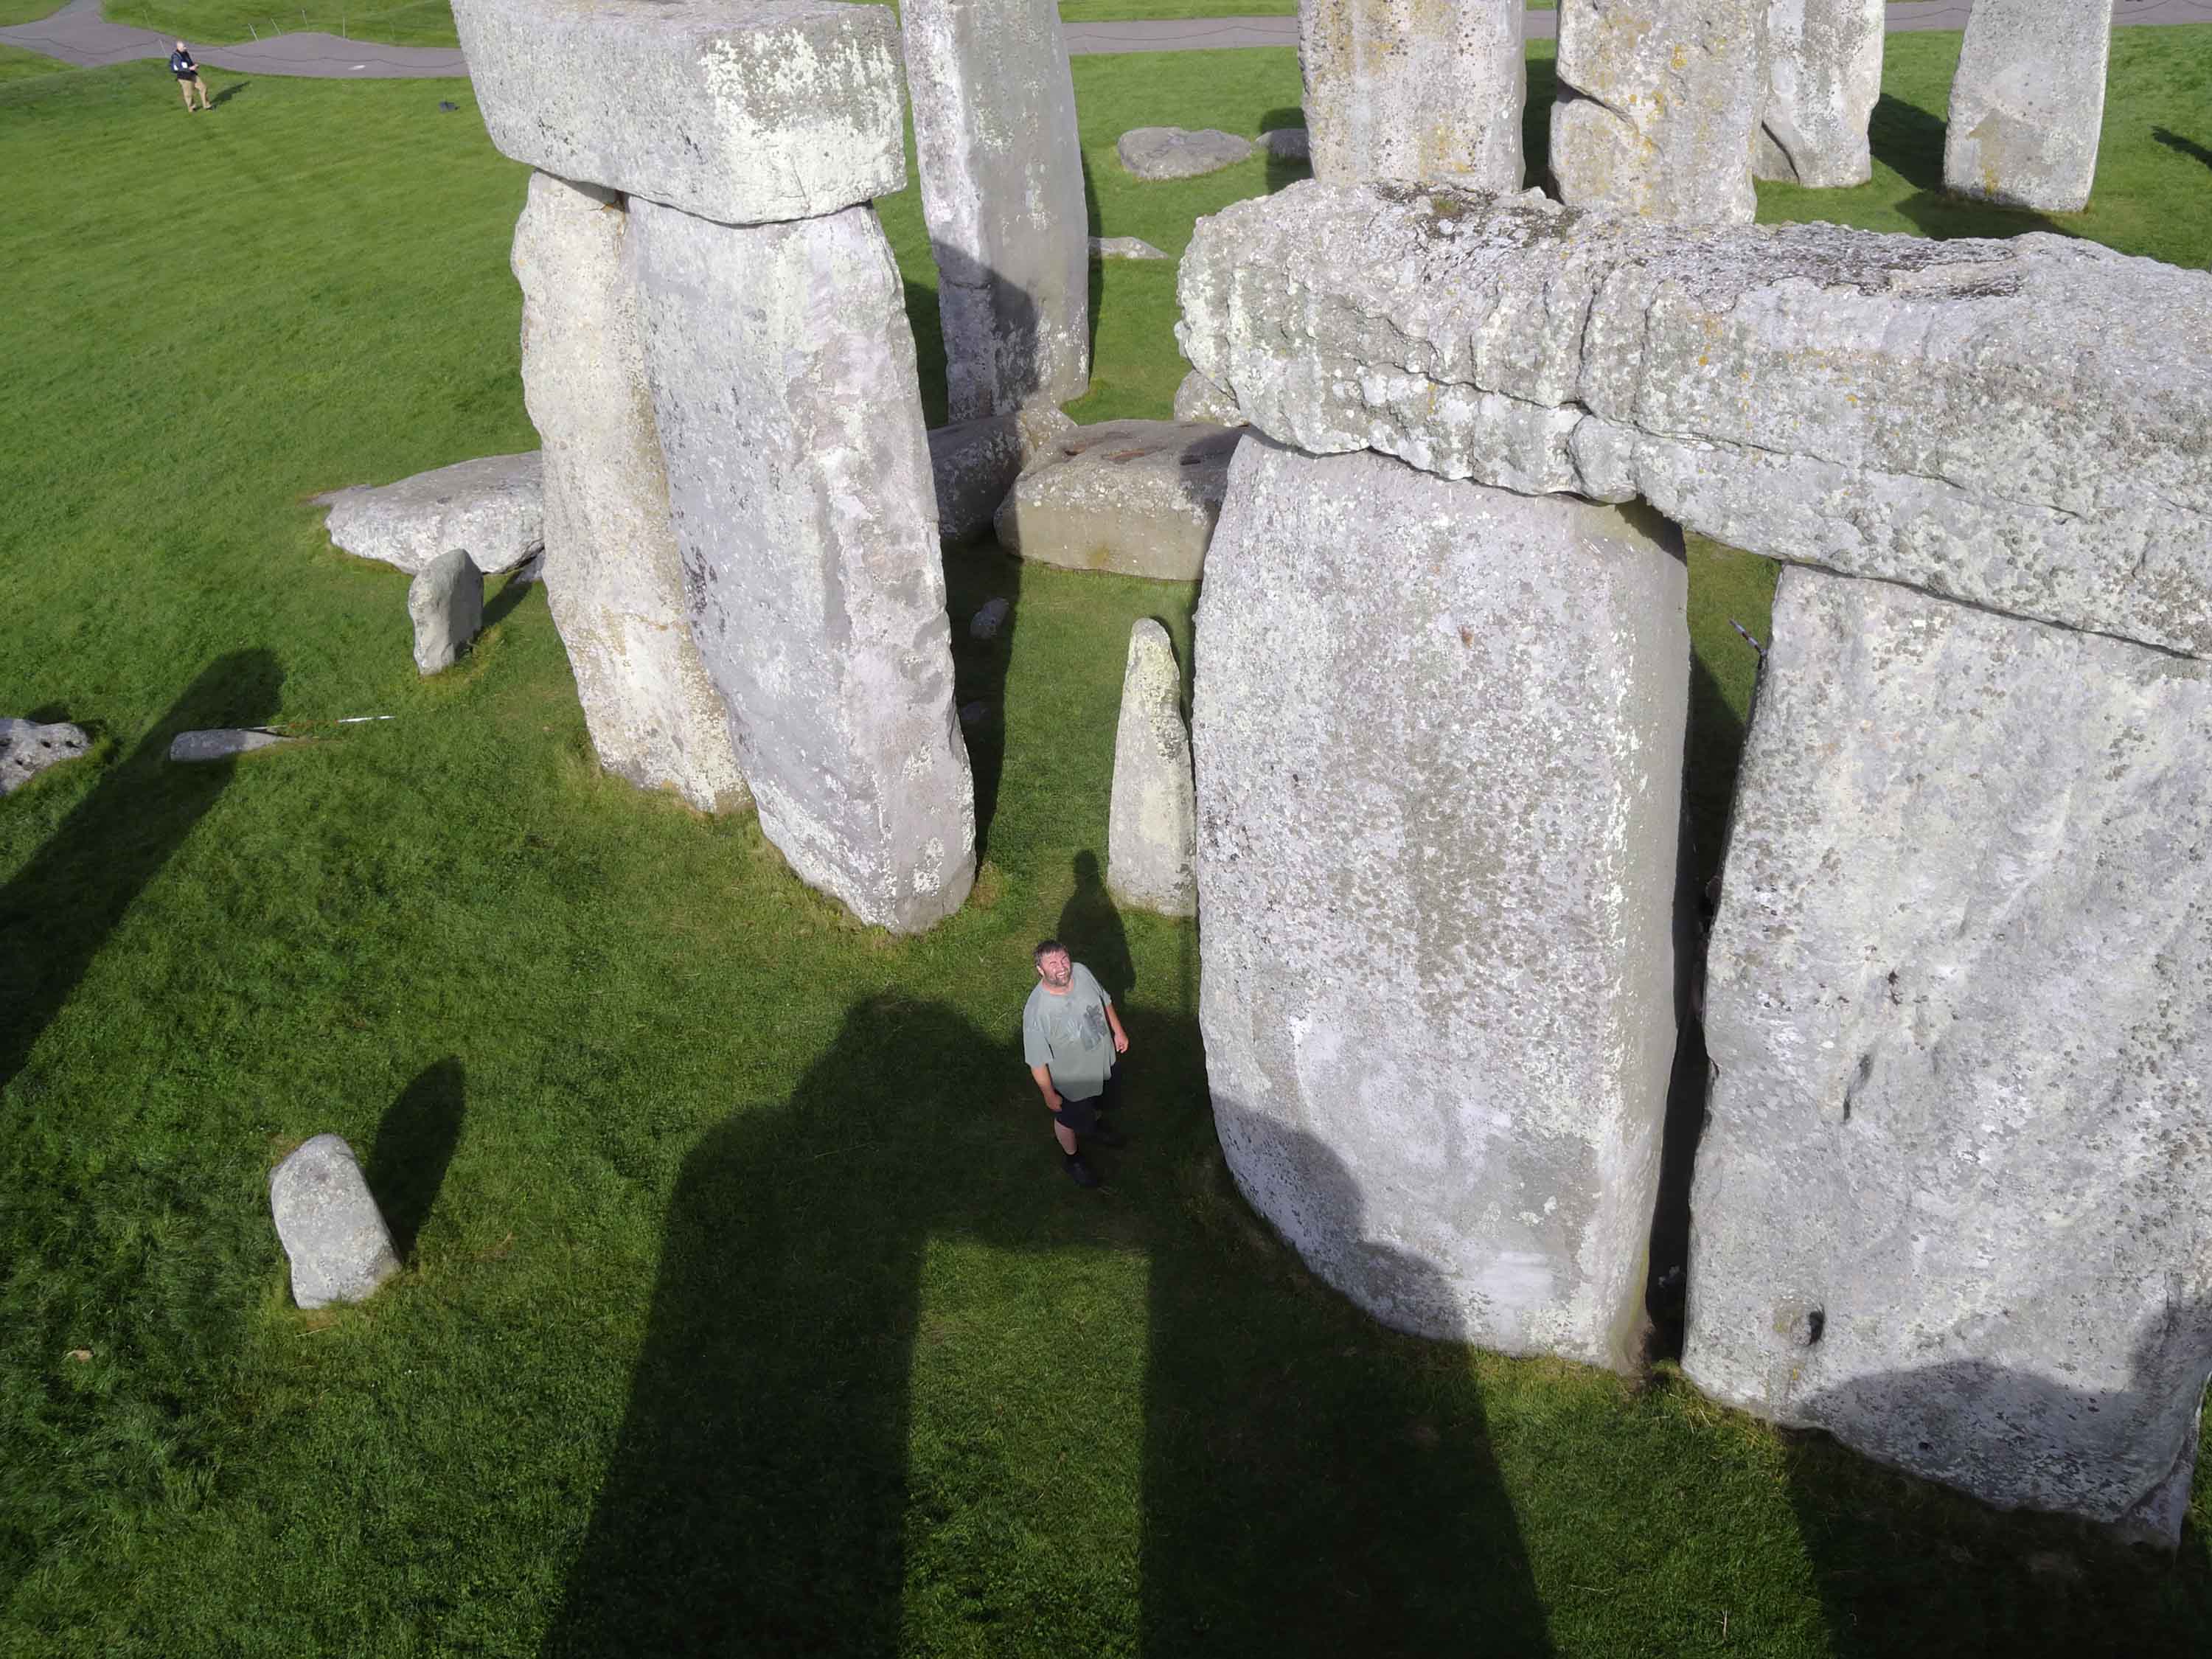 Geologists finally found exactly where some Stonehenge rocks came from | CNN